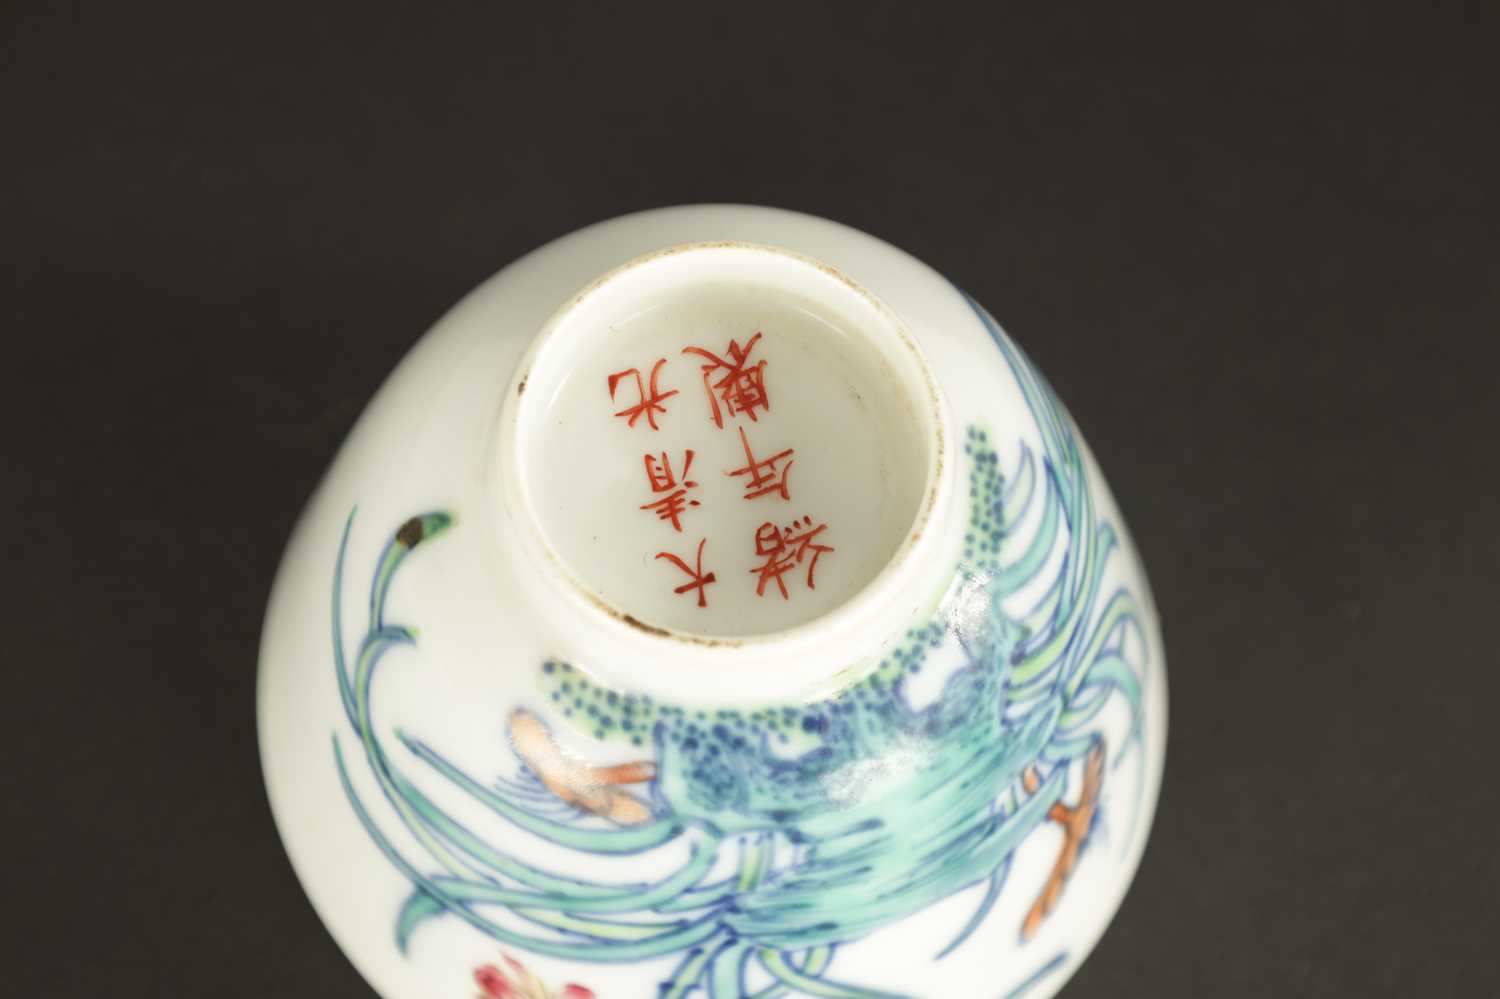 A SMALL CHINESE QING DYNASTY DOCAI PORCELAIN ORCHID FLOWER CUP - Image 5 of 9